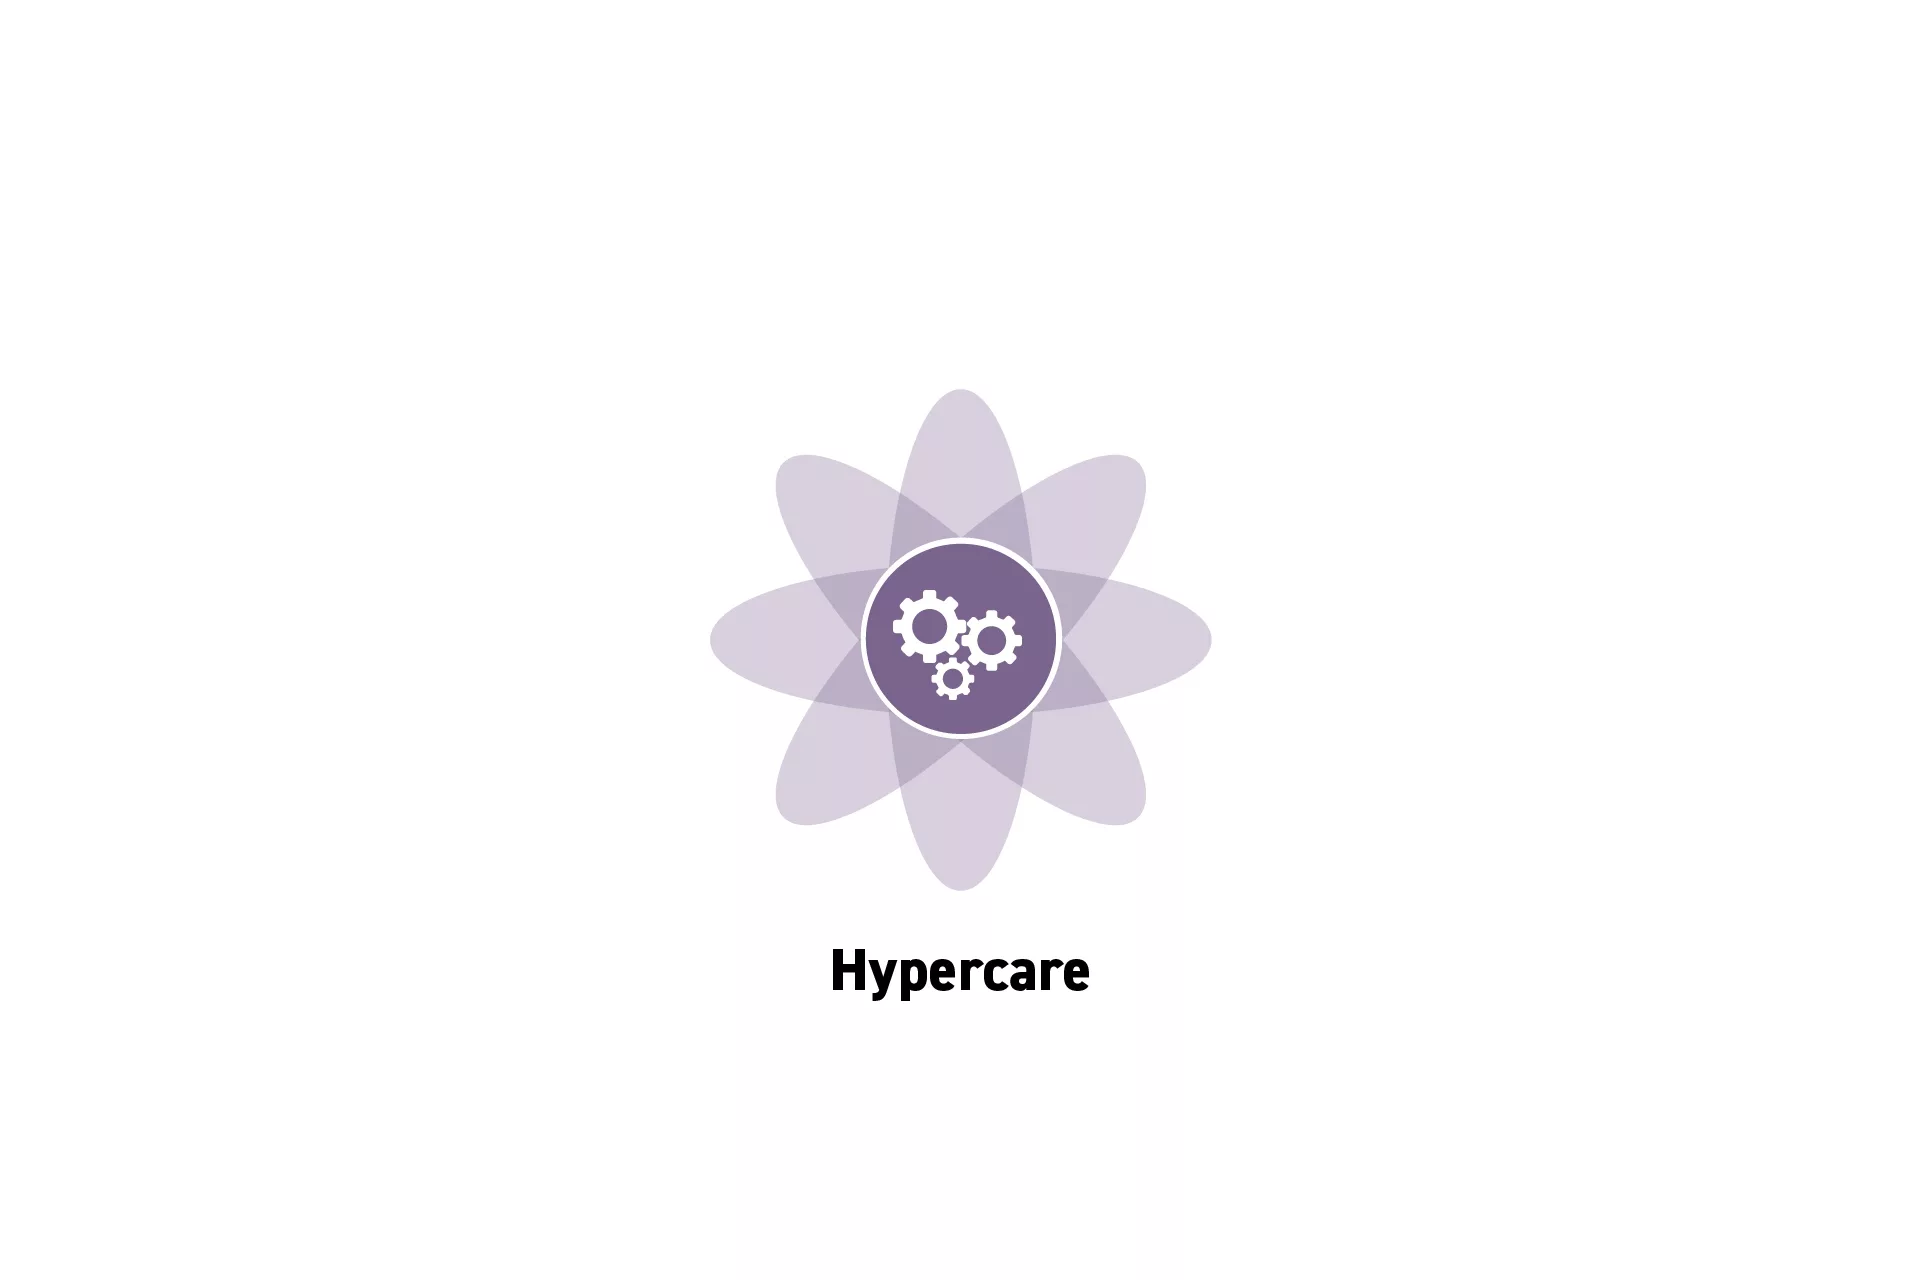 <p>A flower that represents Project Management with the text “Hypercare” beneath it.</p>